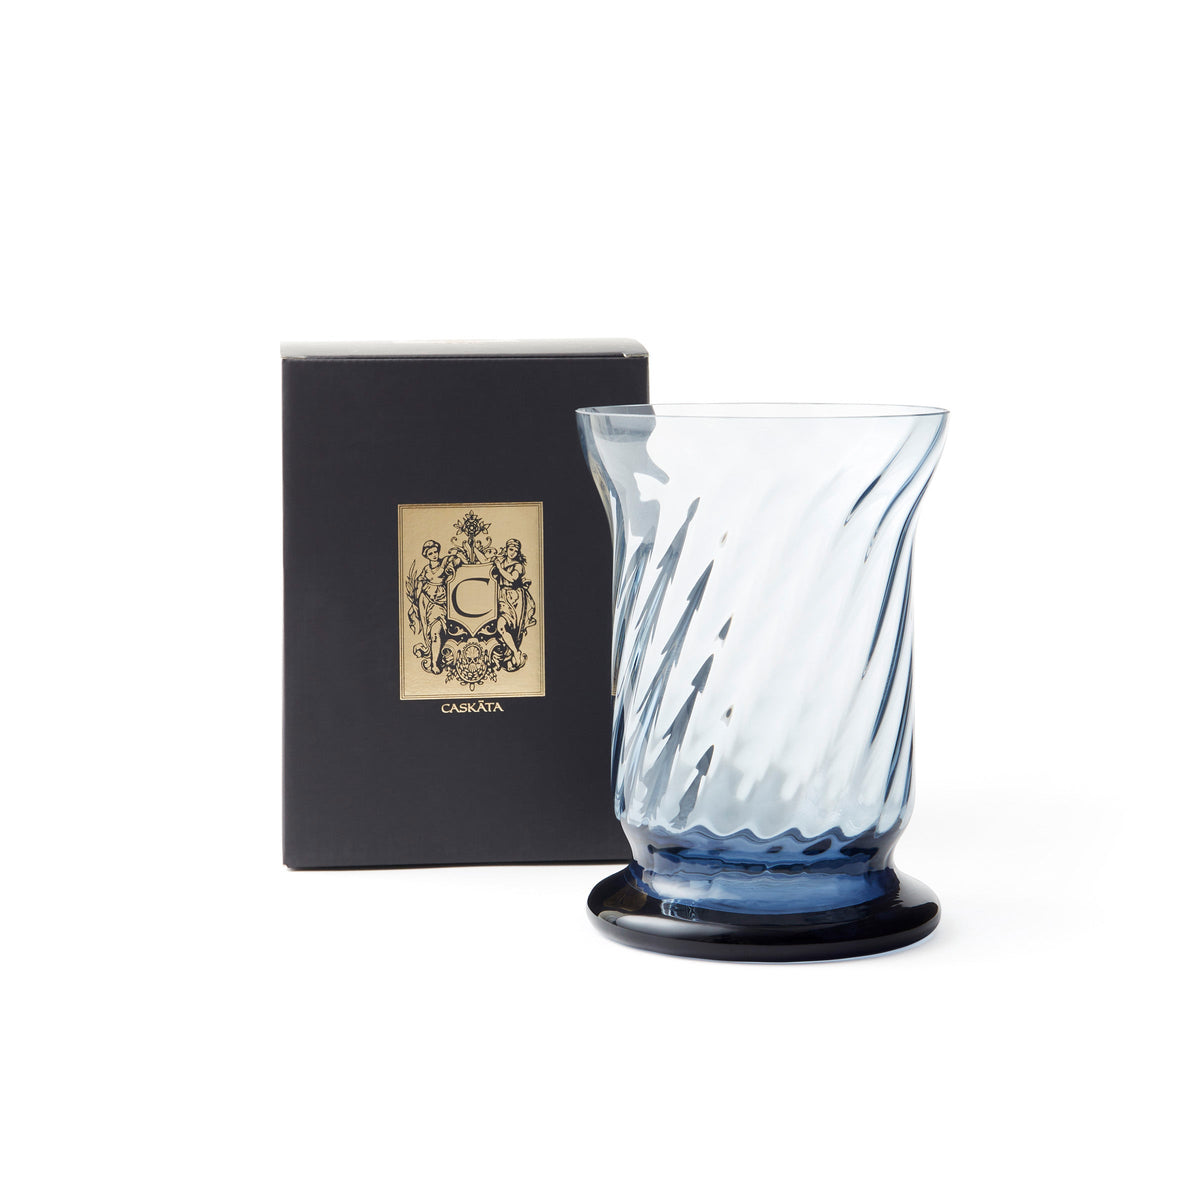 Quinn Ocean Boothbay Hurricane with black and gold gift box.